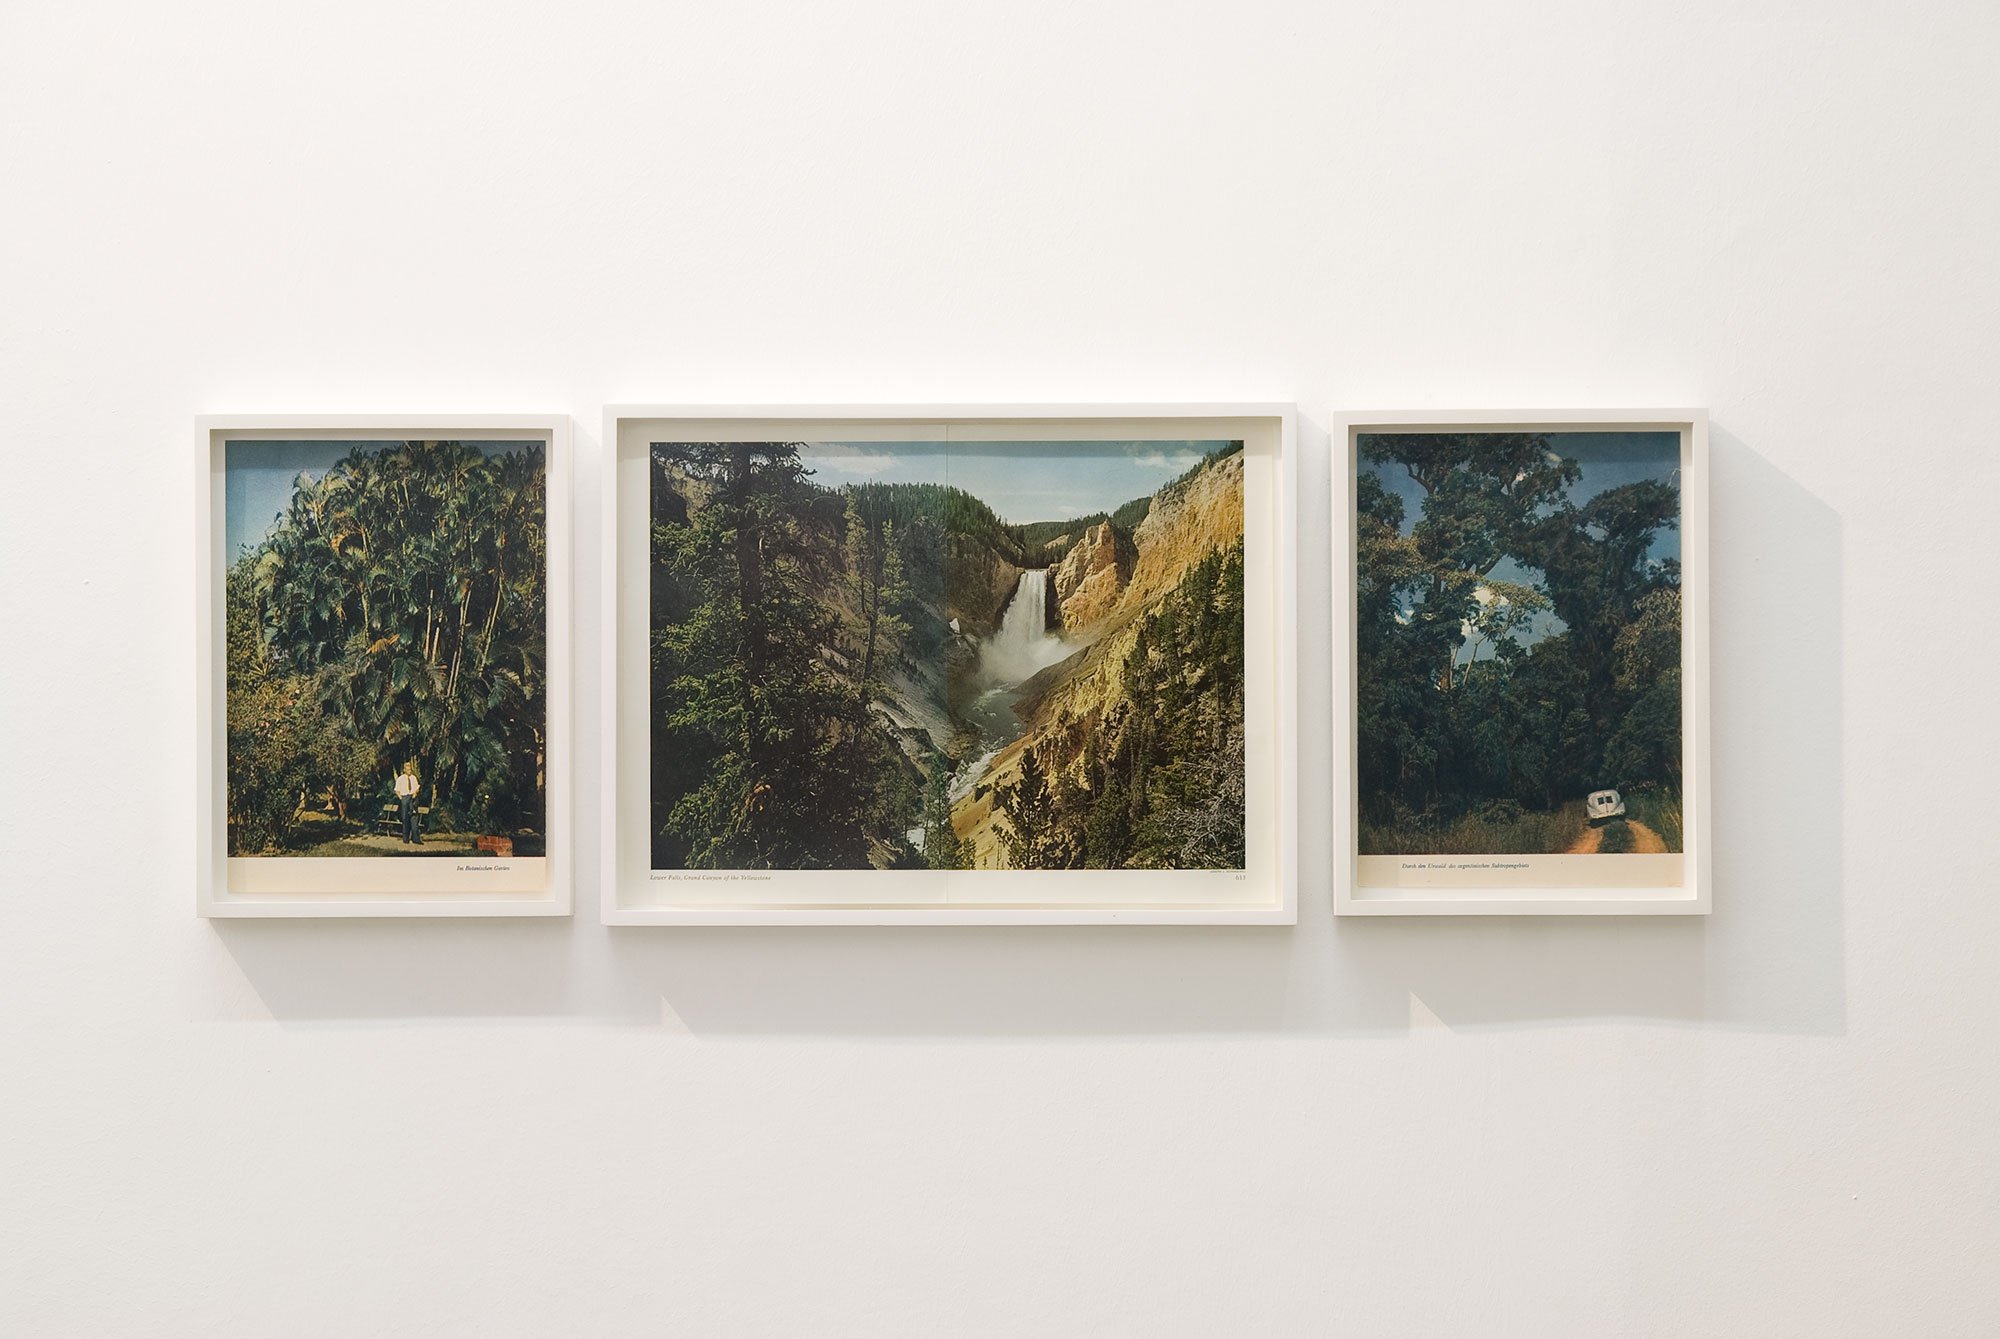 Haris Epaminonda, Untitled, triptych with found images of waterfalls, 26.2 x 19.4 cm (10 1/4 x 7 5/8 in); 36.3 x 27.2 cm (14 1/4 x 10 3/4 in); 26.2 x 19.4 cm (10 1/4 x 7 5/8 in). Installation view, VOL. IV, Rodeo, Istanbul, 2009